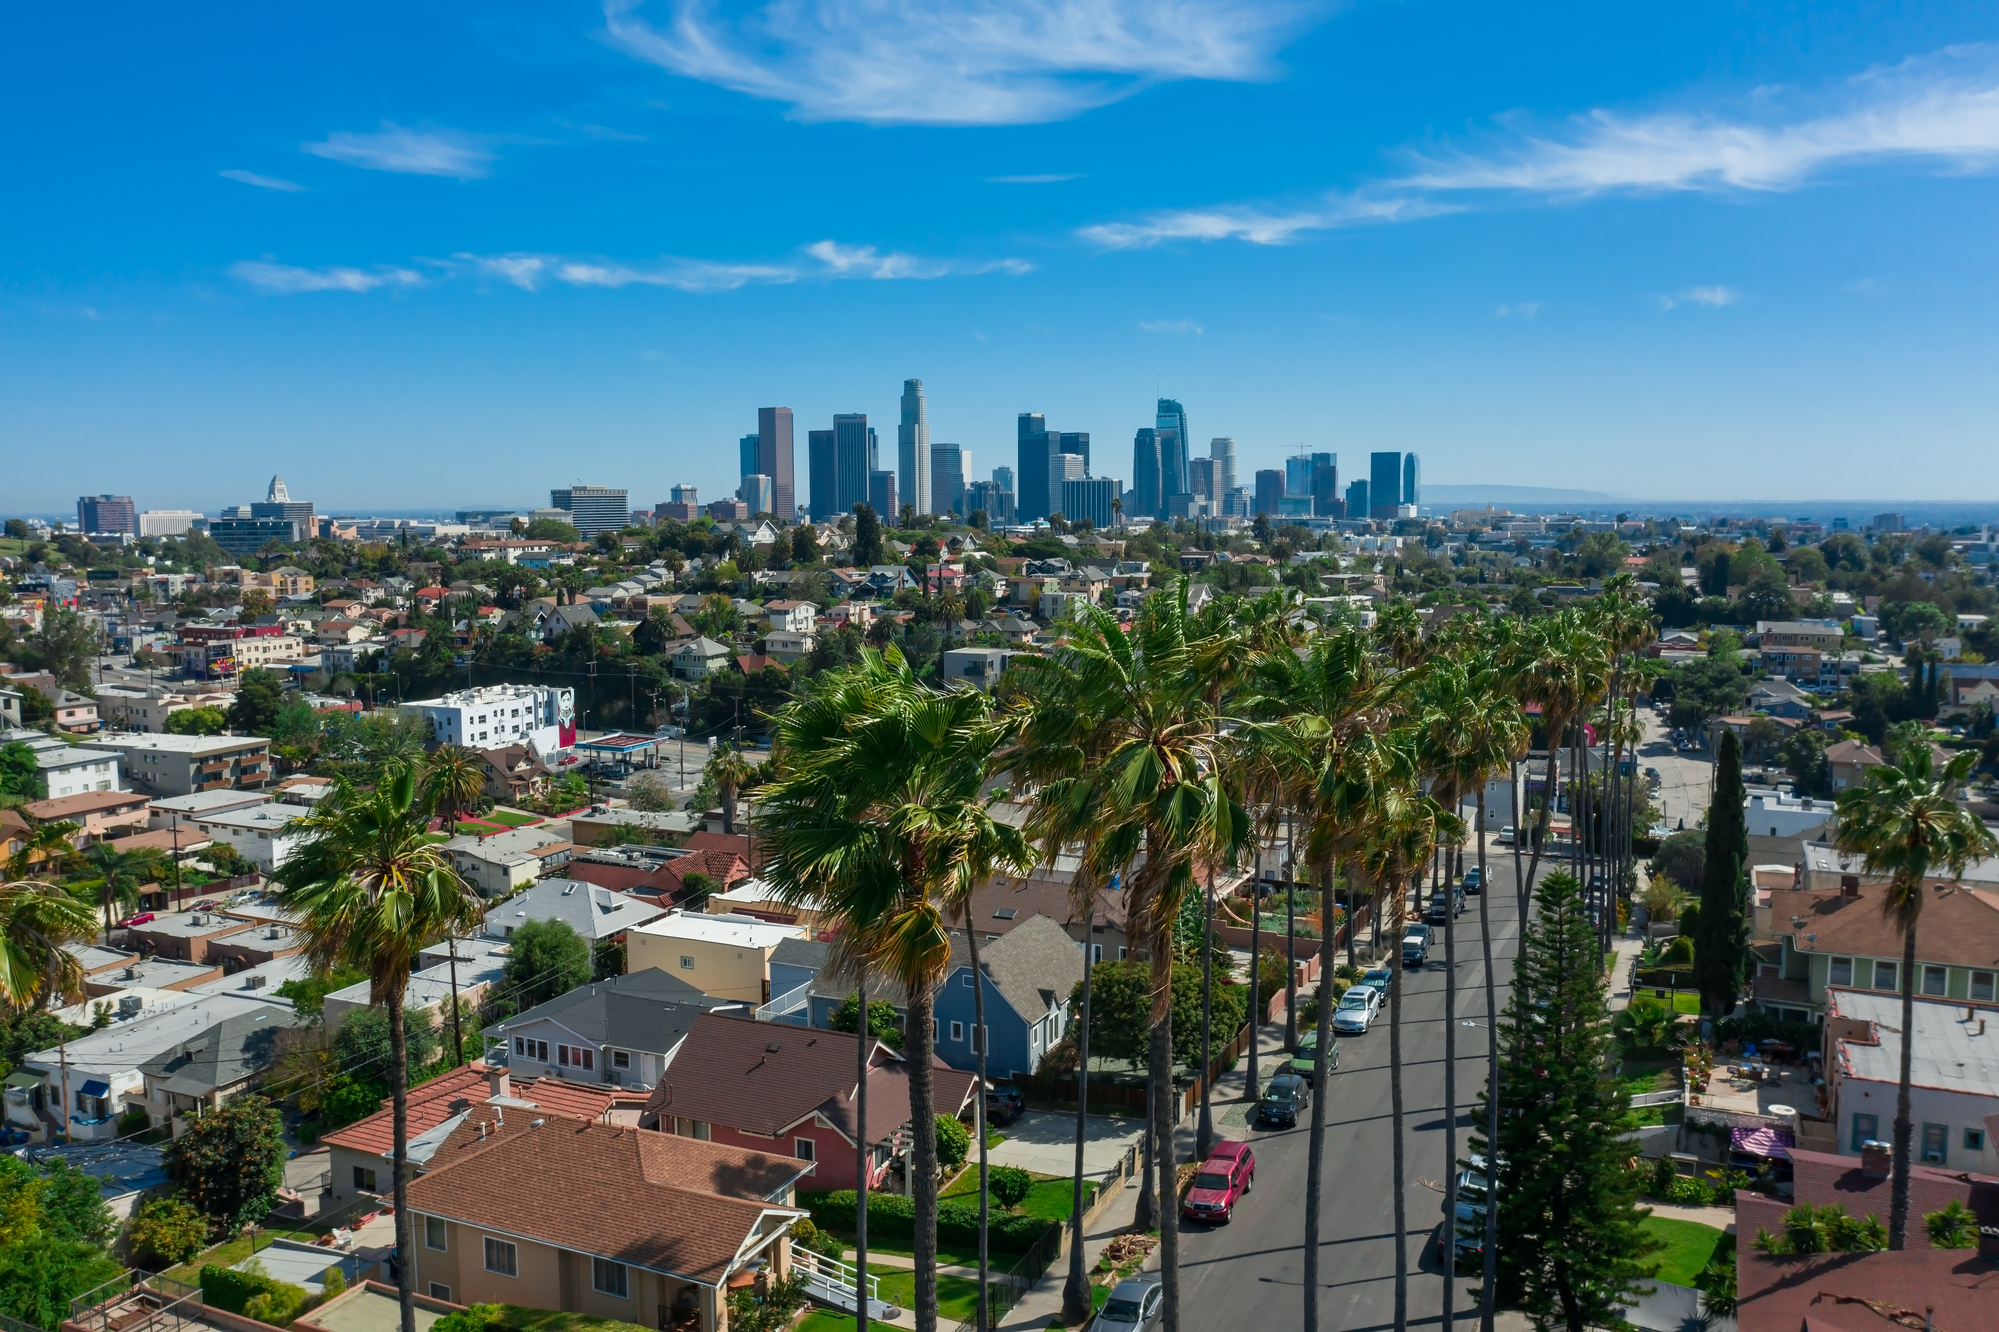 LA for Digital Nomads and Remote Workers